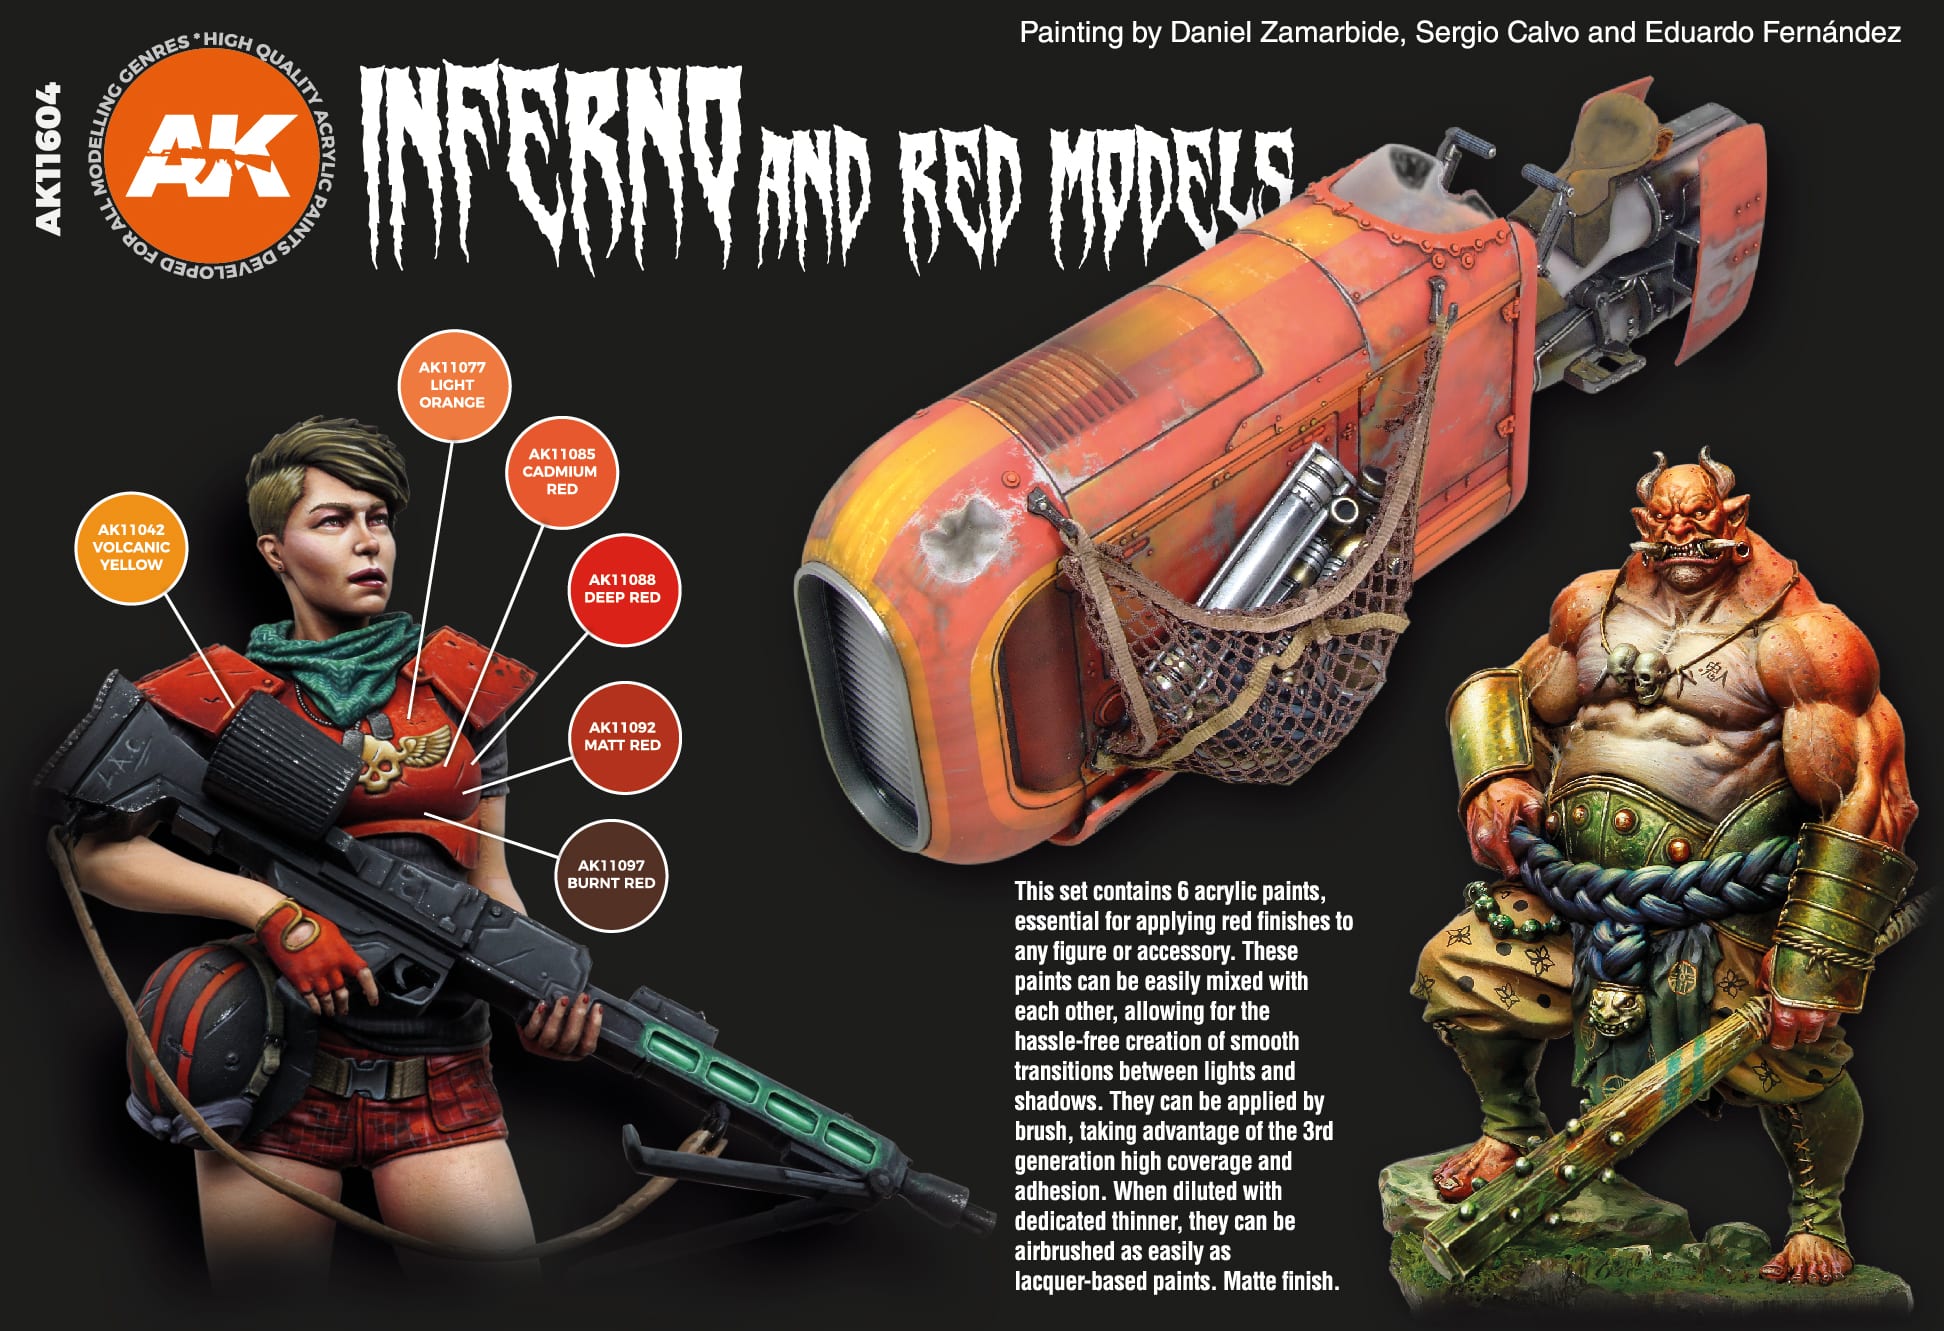 AK11604 -  Inferno and Red Creatures Set